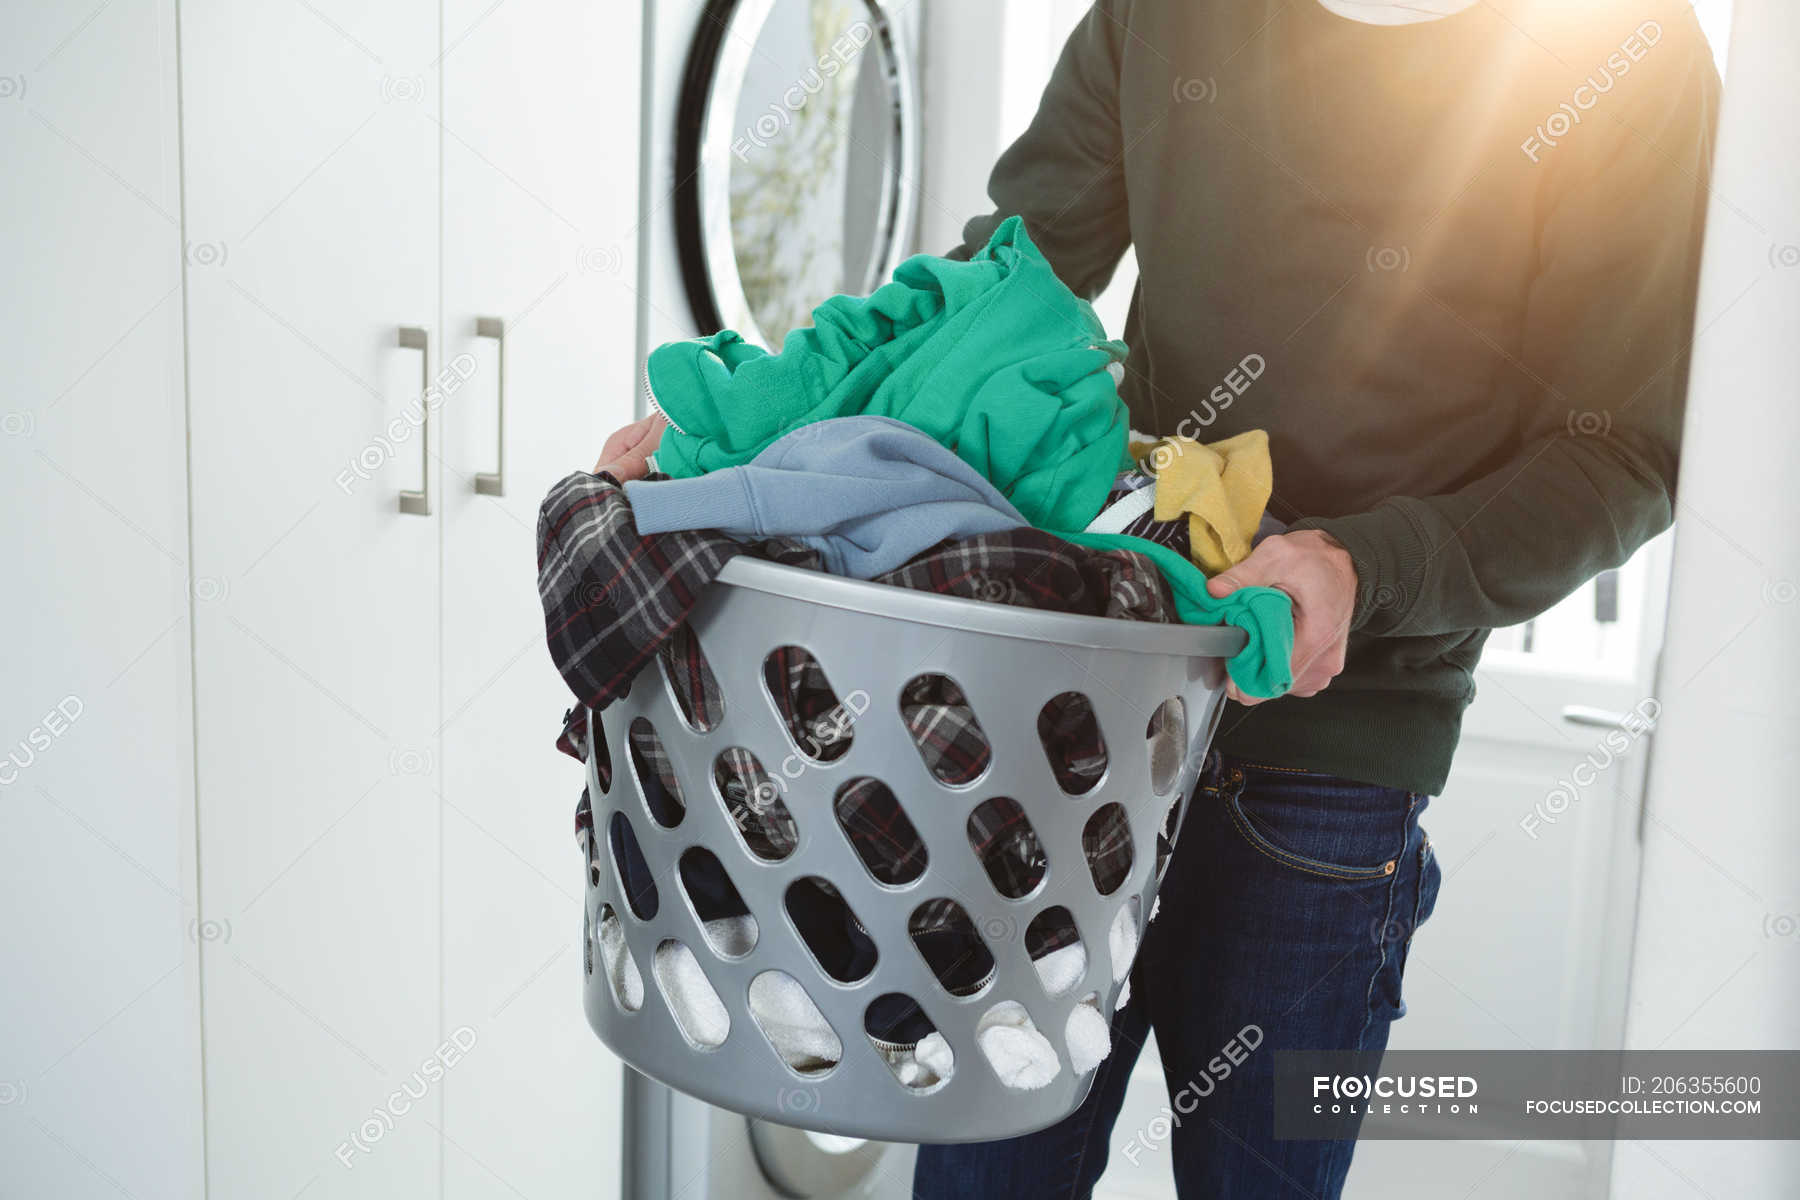 elleboog pomp Claire Man holding basket of laundry clothes at home — self isolation, indoors -  Stock Photo | #206355600